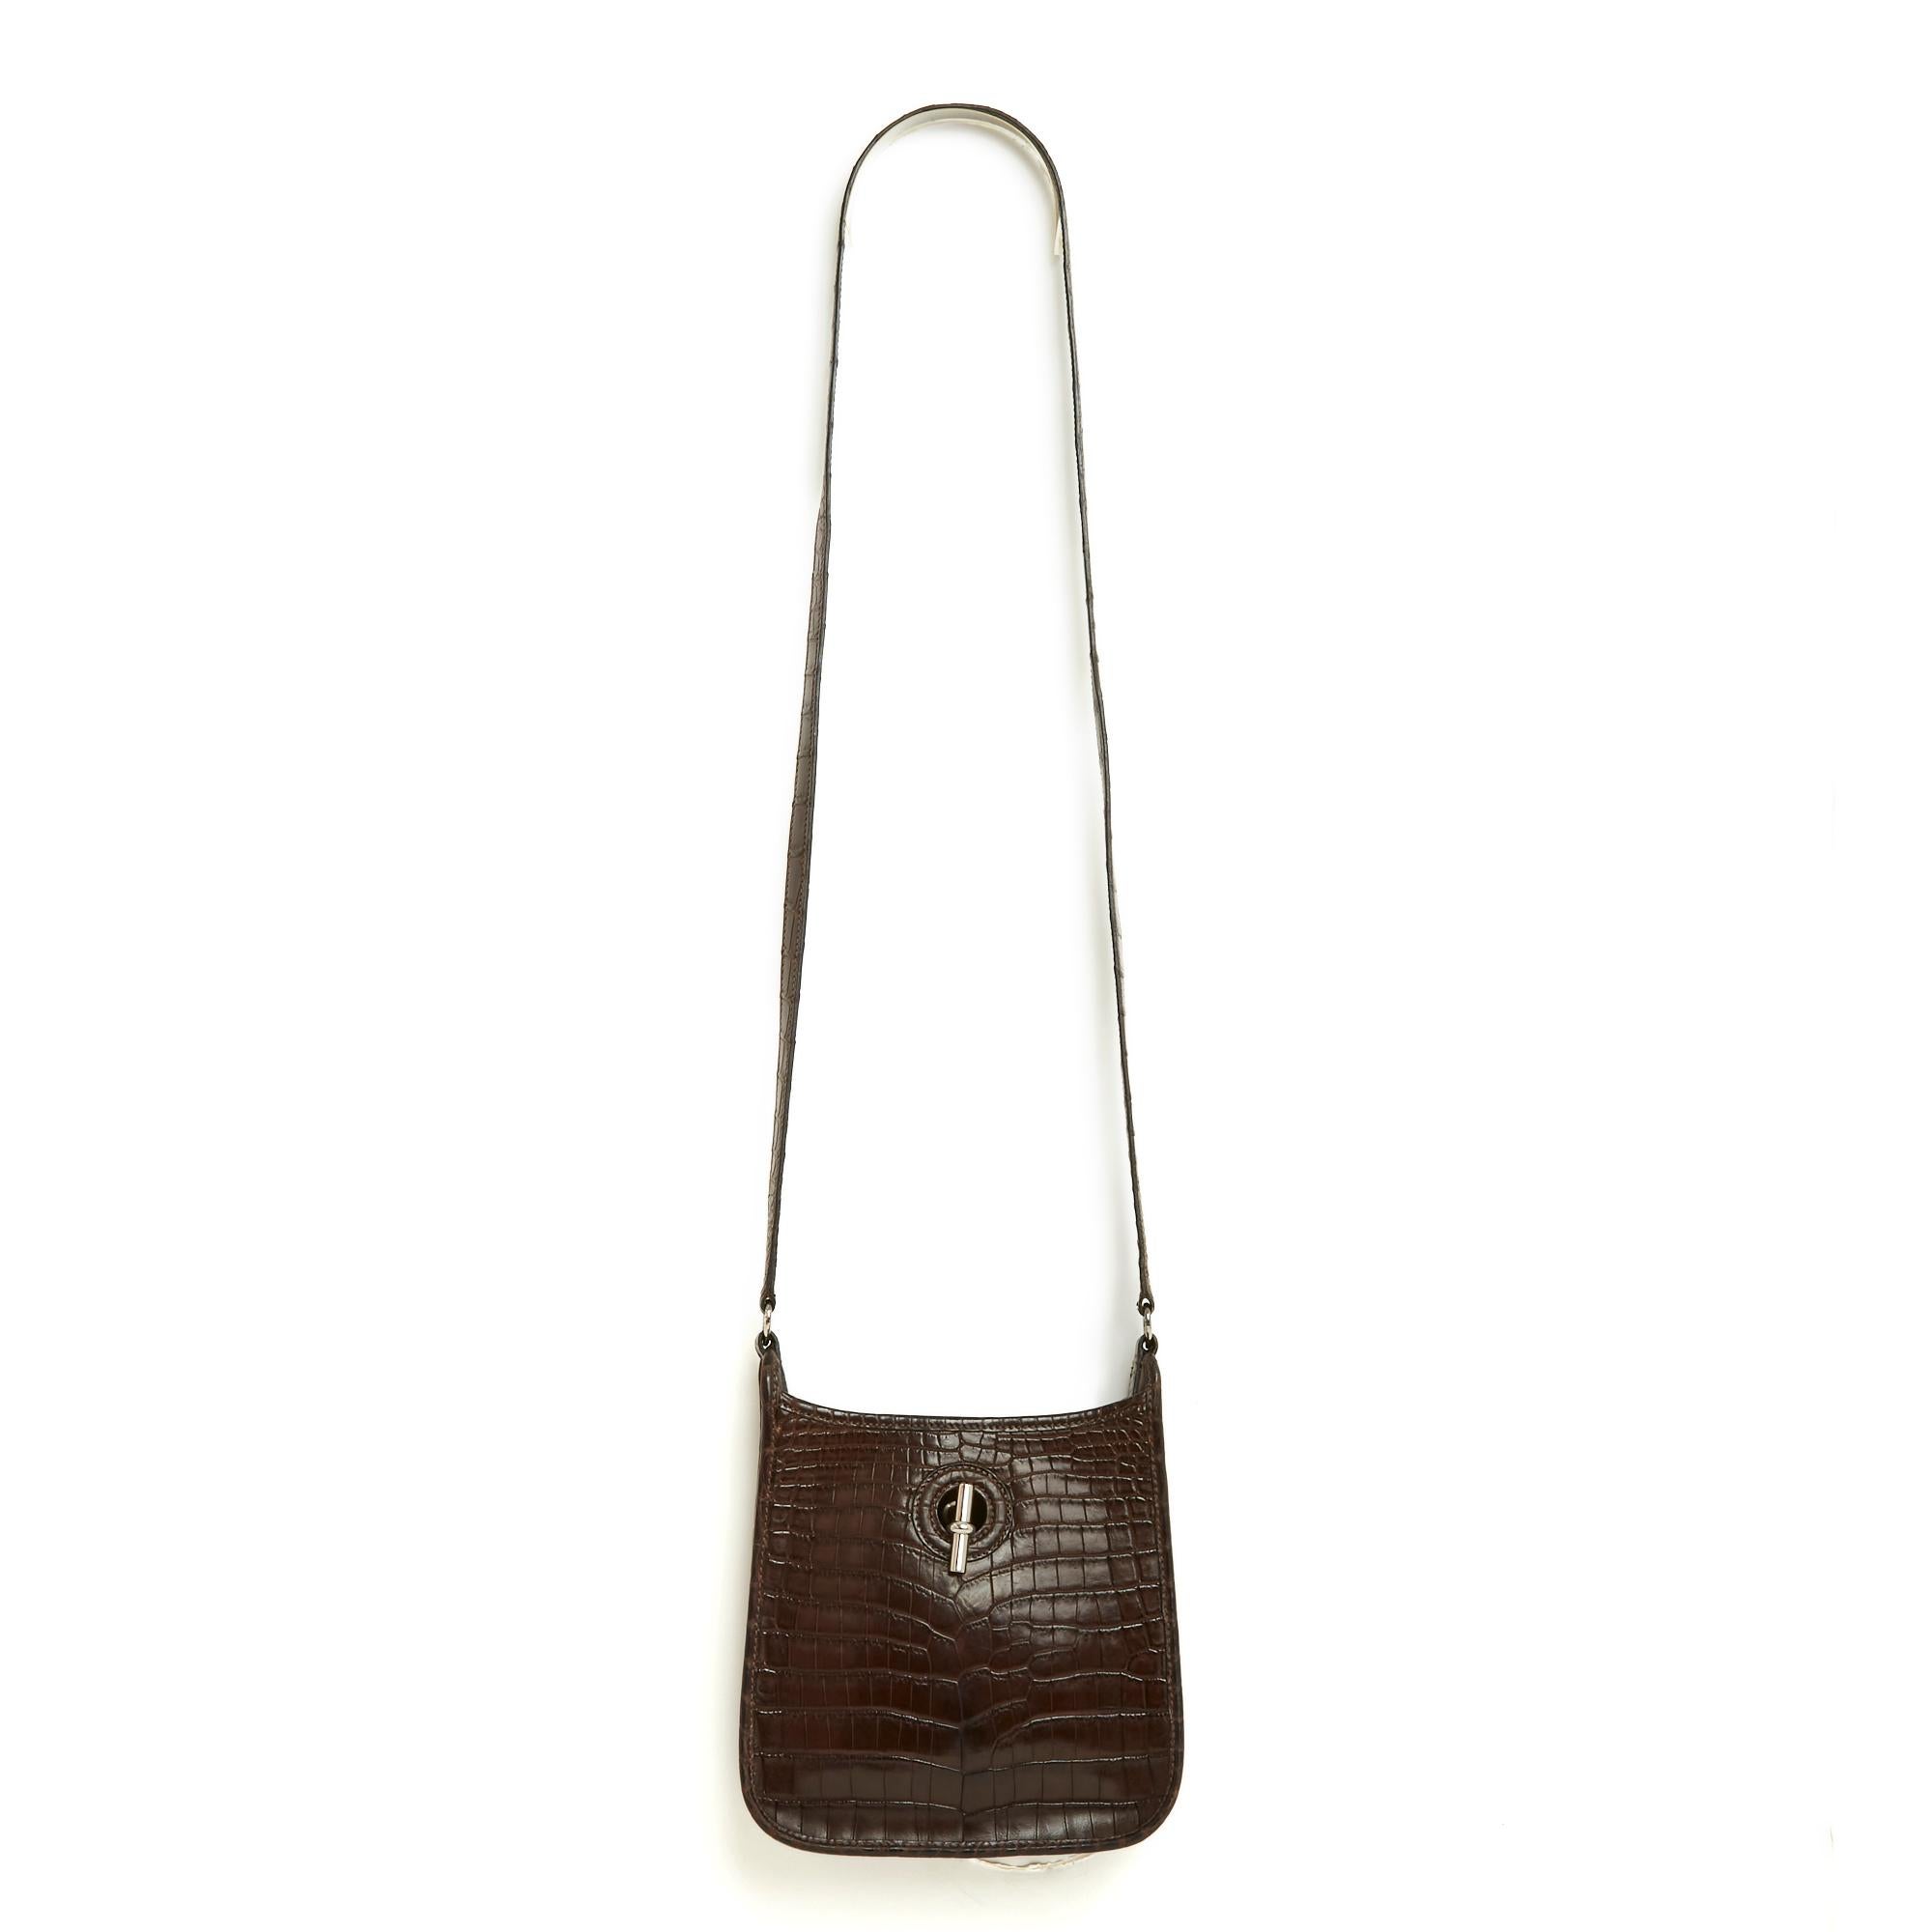 Hermès bag, Vespa model, TPM or 18 format, in exotic leather (Niloticus) ebony color (dark brown), anchor chain clasp, long shoulder strap for crossbody wear, year 2004. Width 18 cm x height 18 cm x depth 4 cm, shoulder strap 112 cm. The bag has